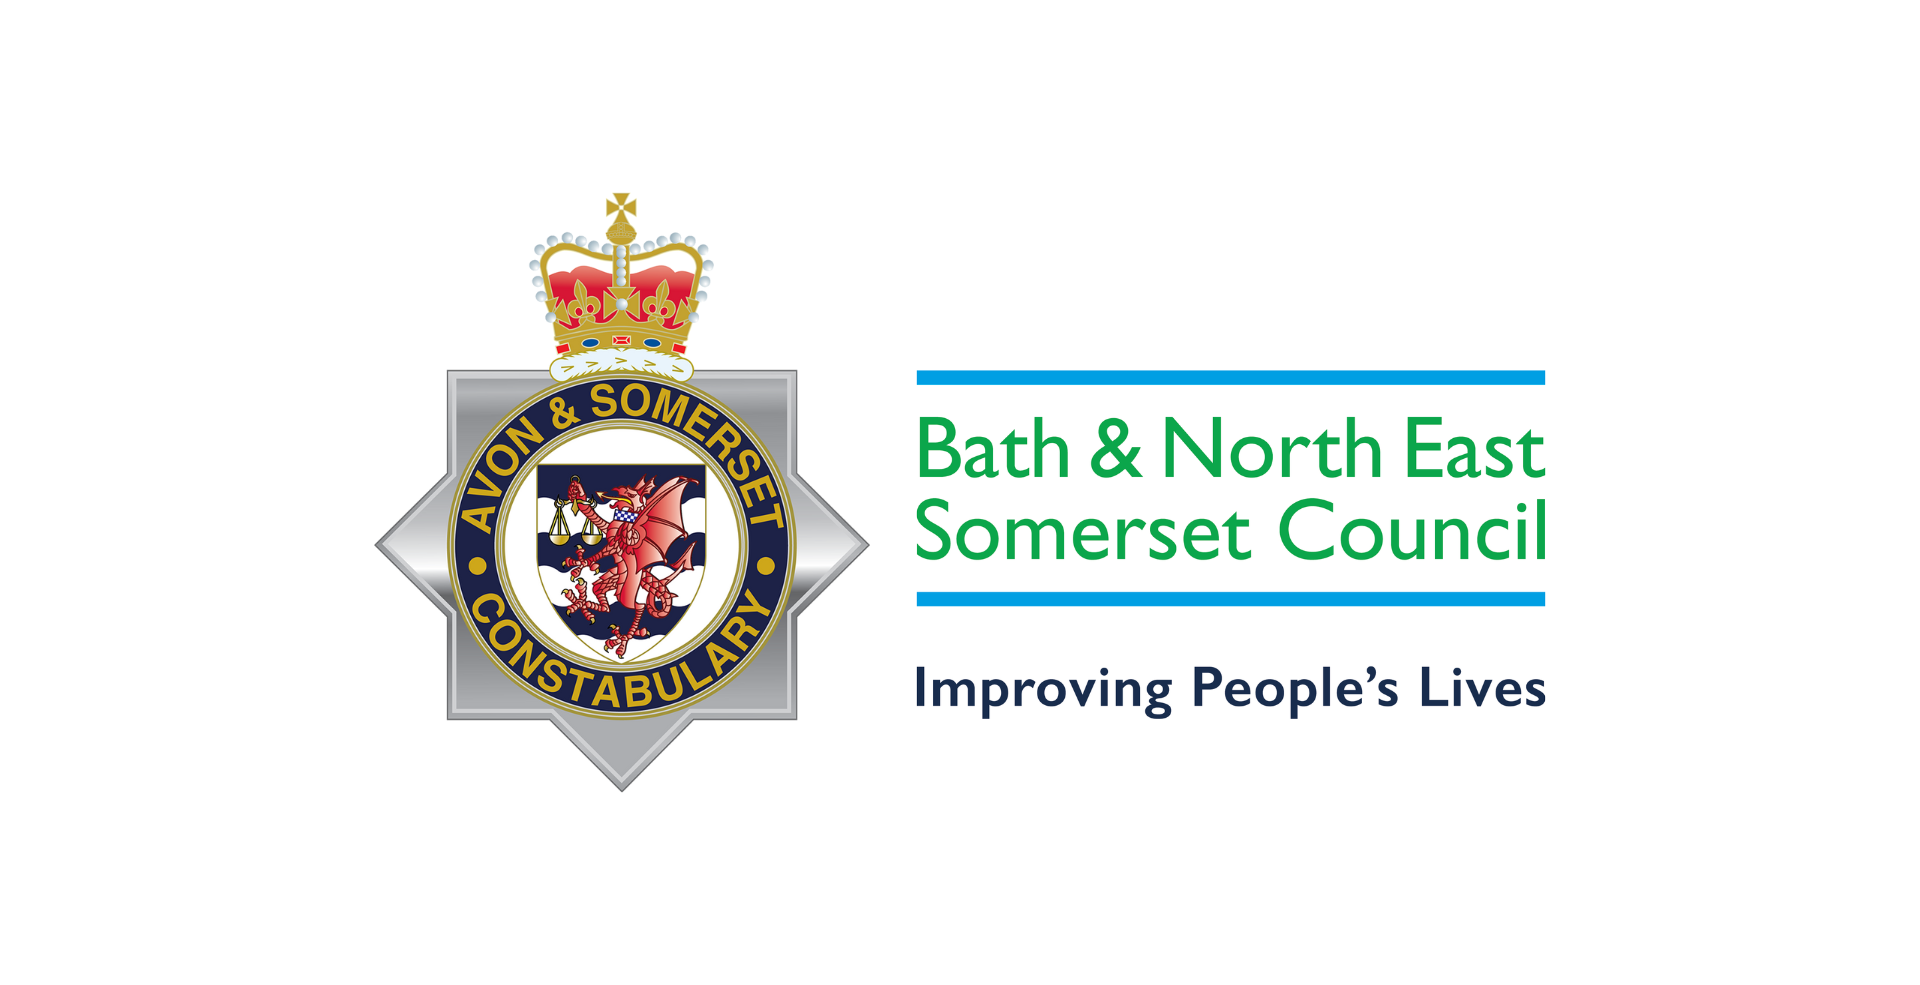 Weston fatal stabbing – a joint message from Bath & North East Somerset Council and Avon and Somerset Police 